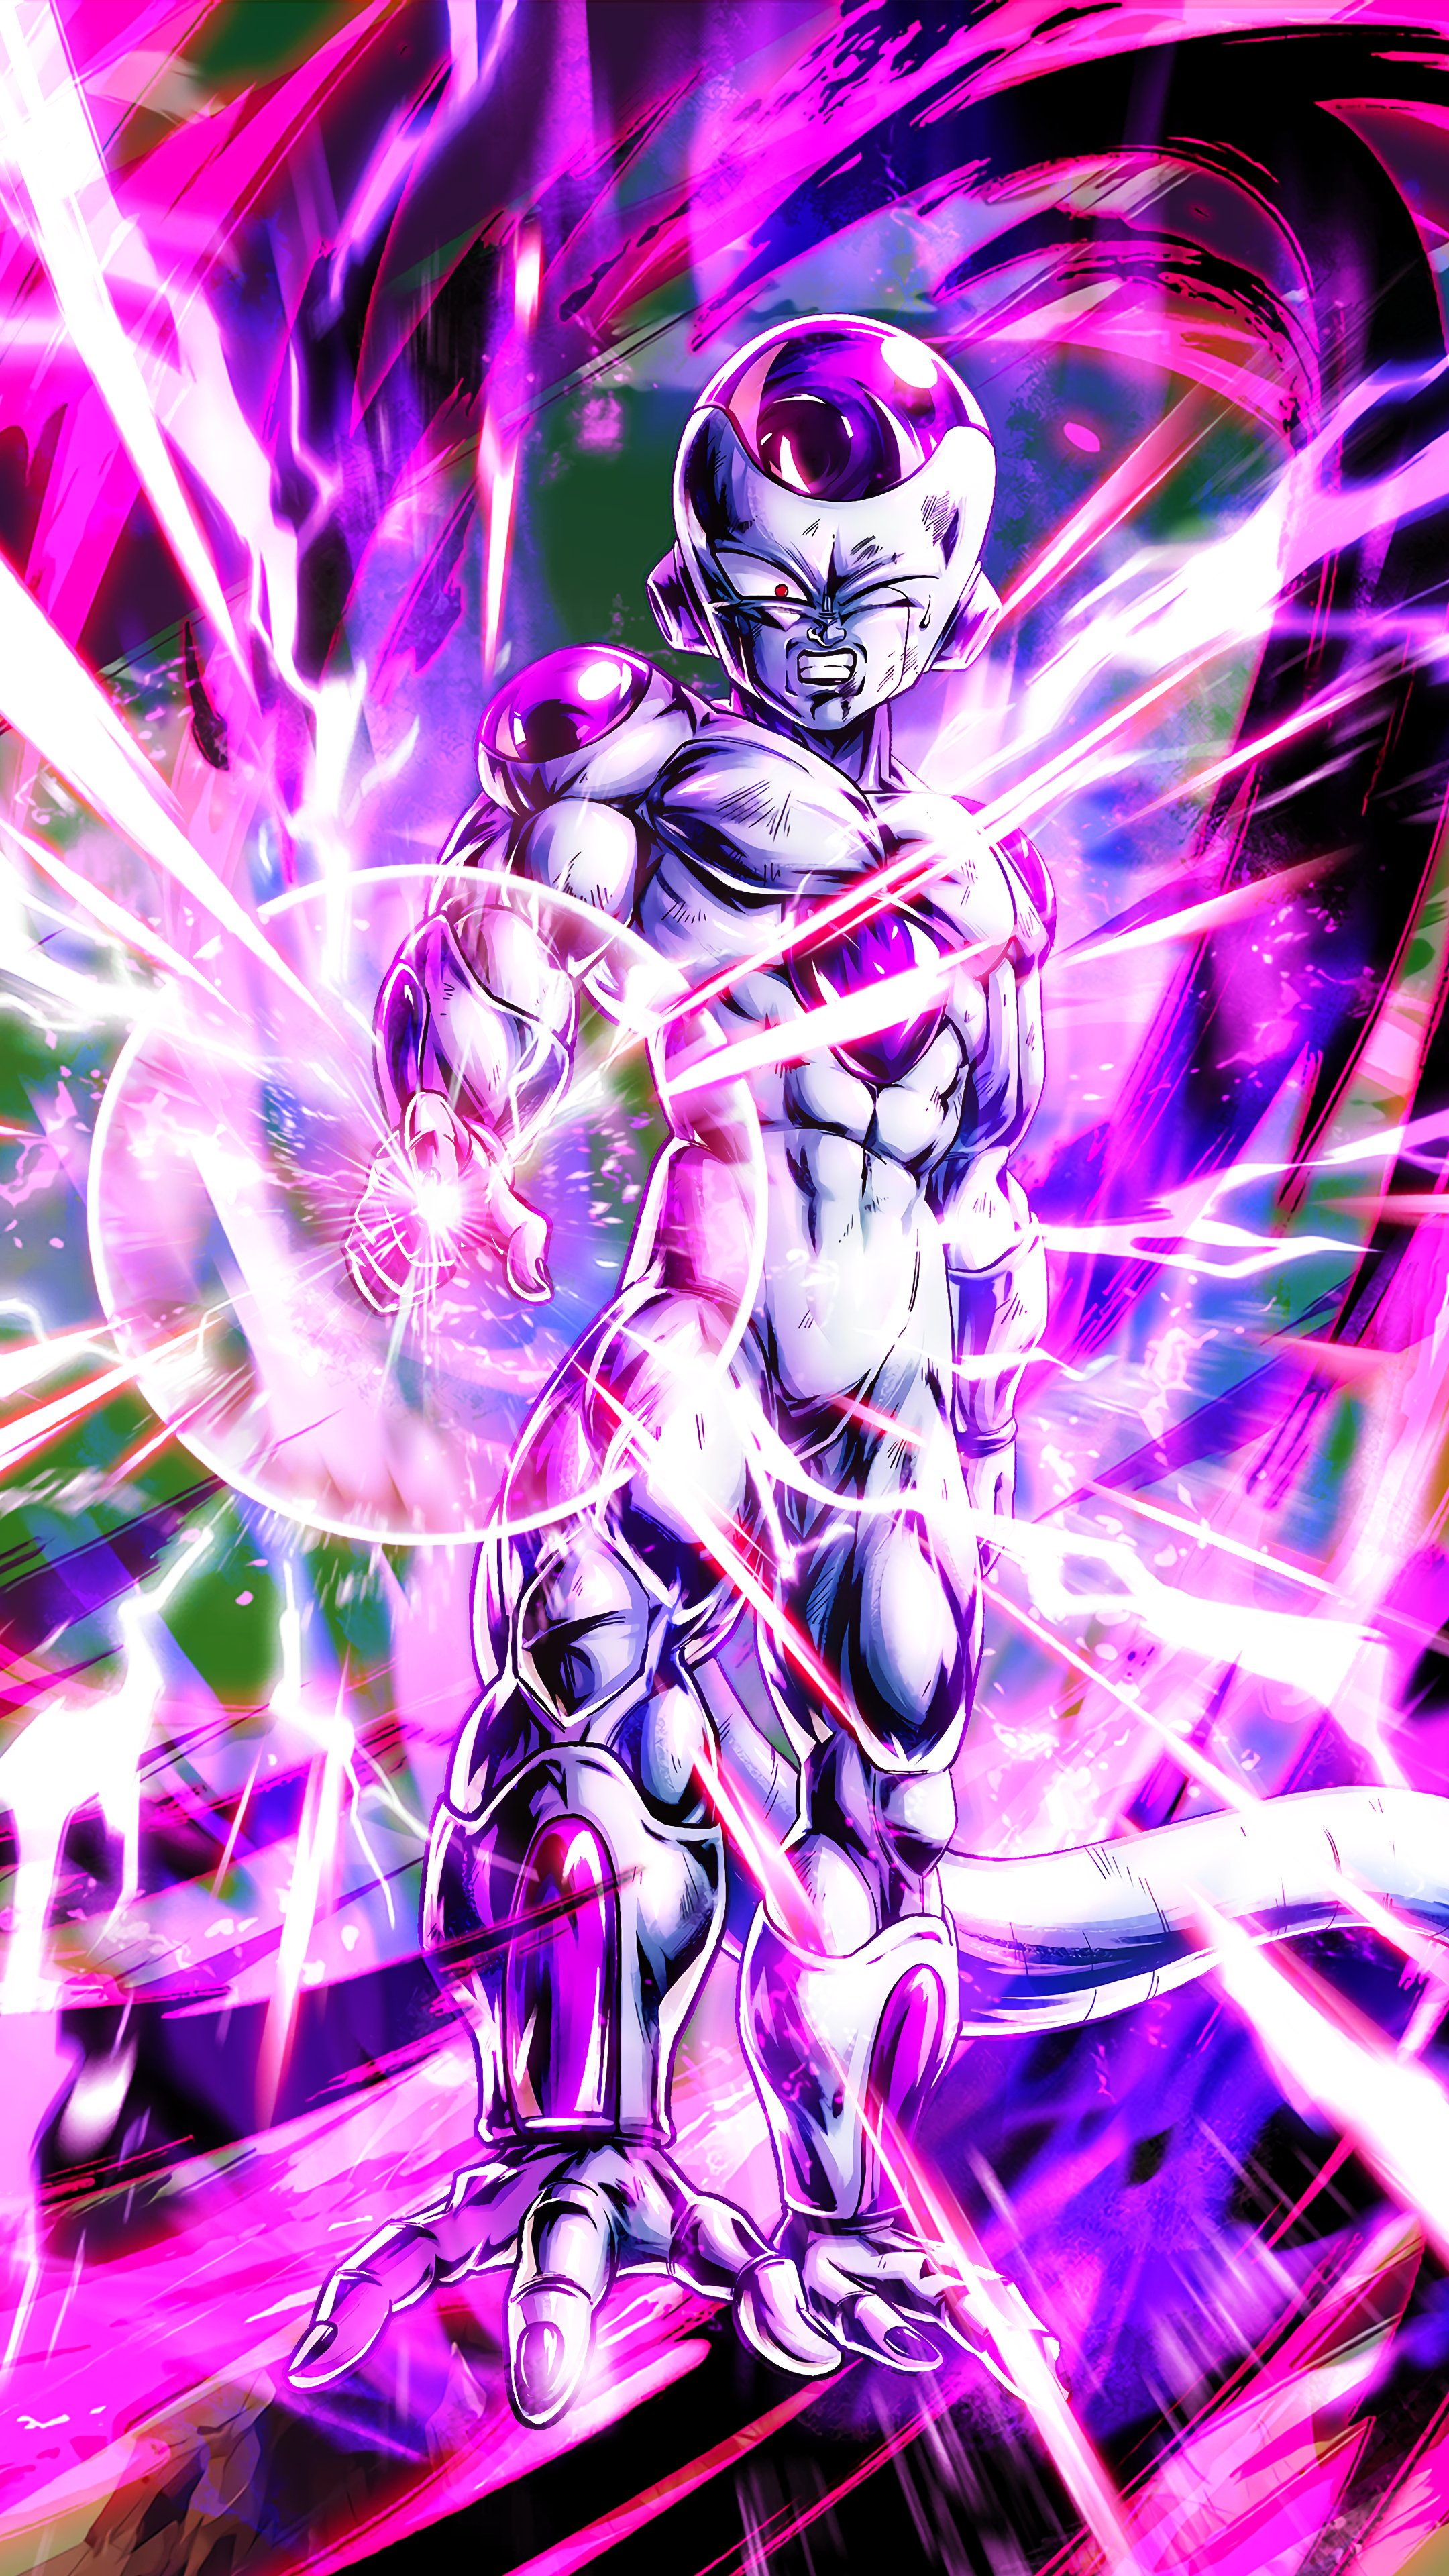 Frieza Wallpapers 4k For Dragon Ball Fans To Satisfy Their Passion